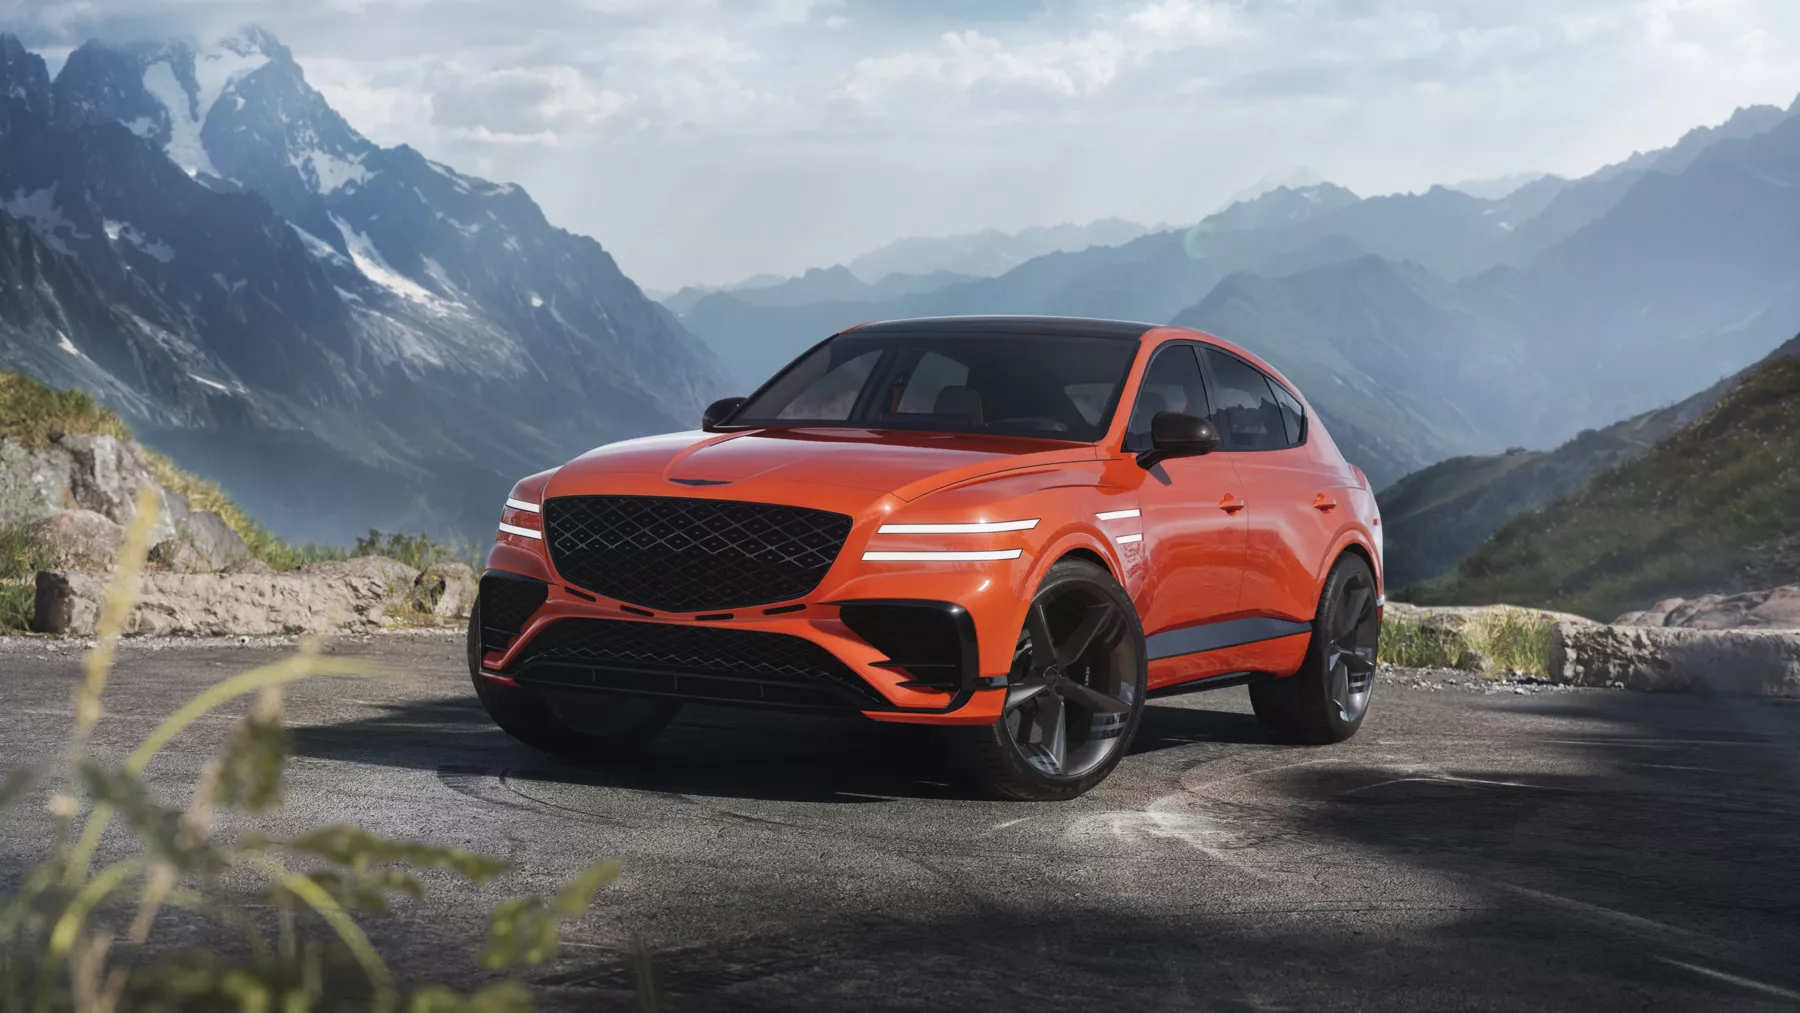 GV80 Coupe Concept is dramatically positioned against a mountain landscape.